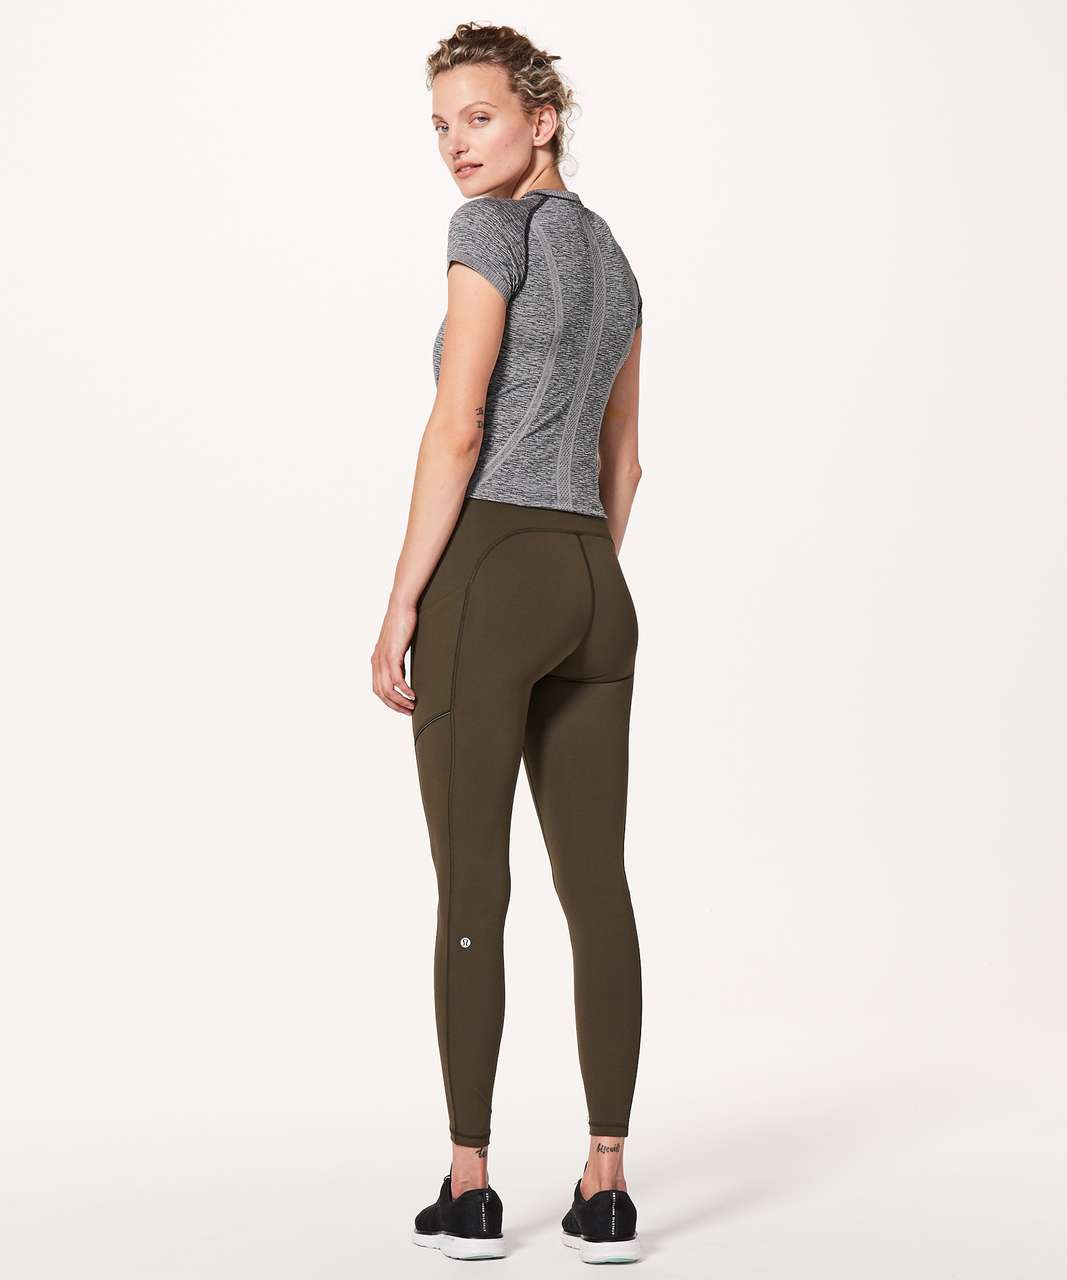 Lululemon Speed Up Tight *Full-On Luxtreme 28" - Dark Olive (First Release)